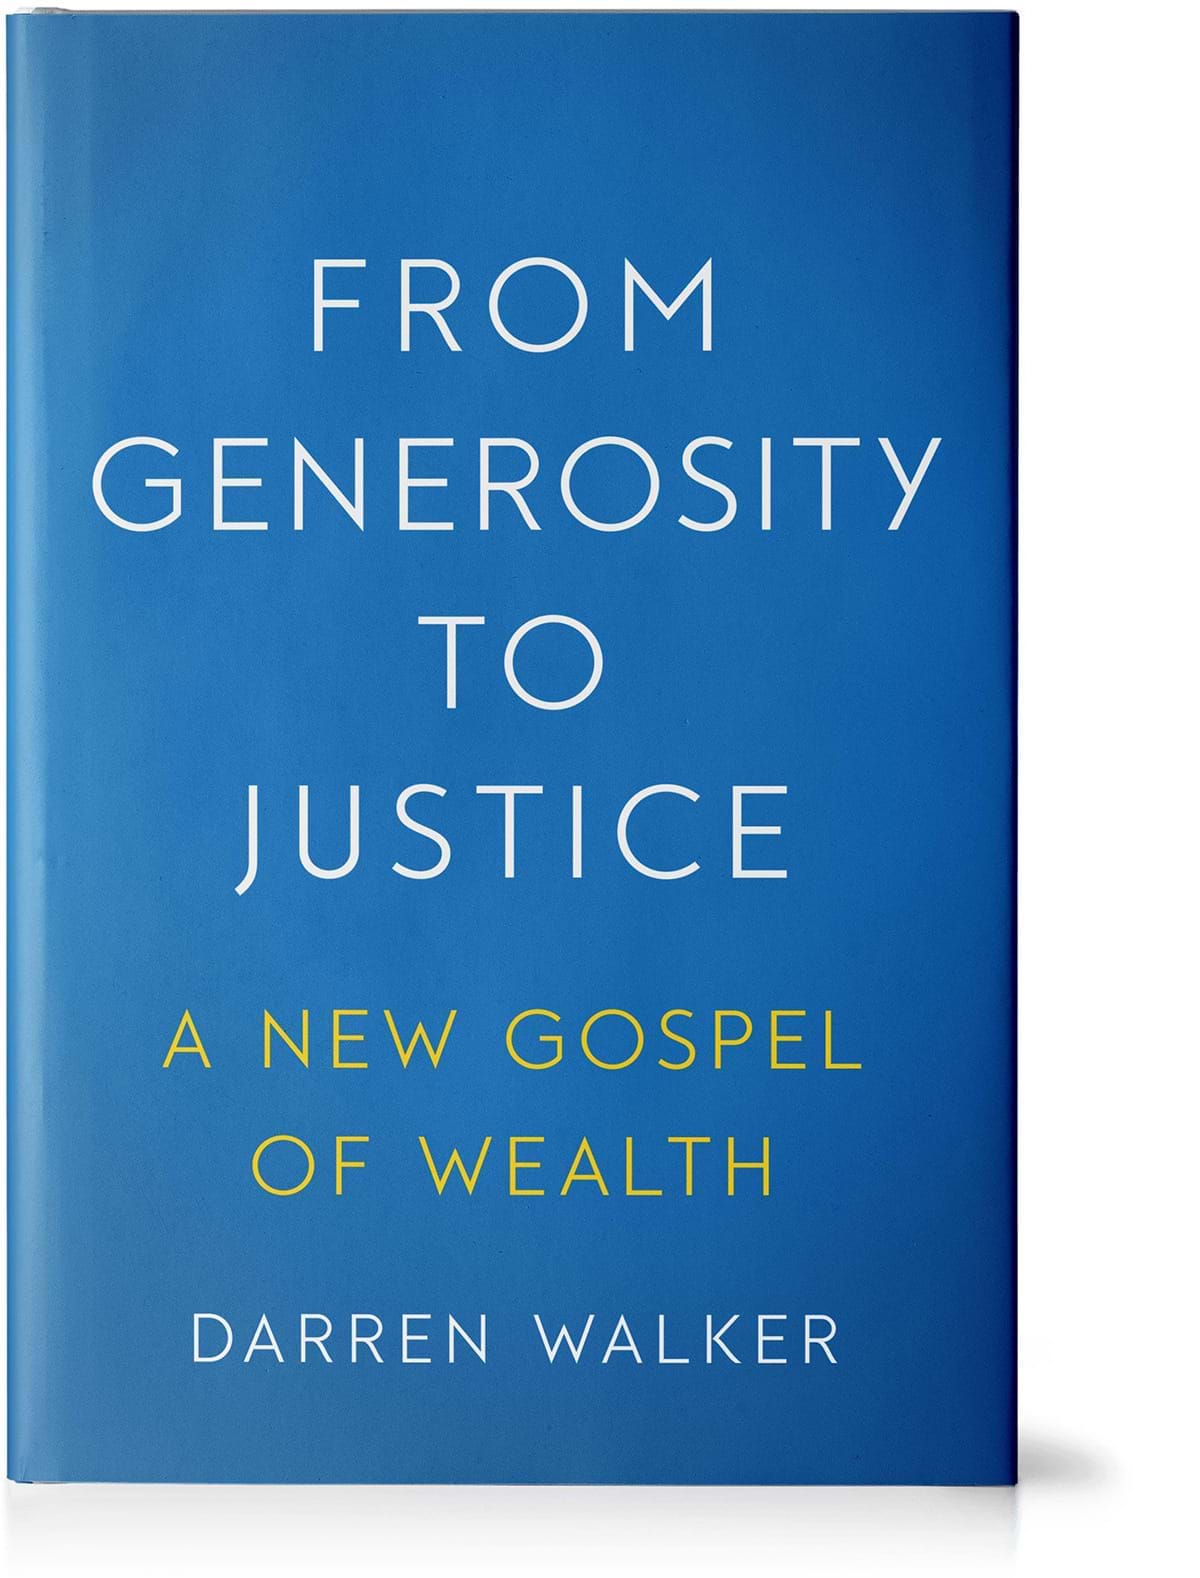 From Generosity to Justice book